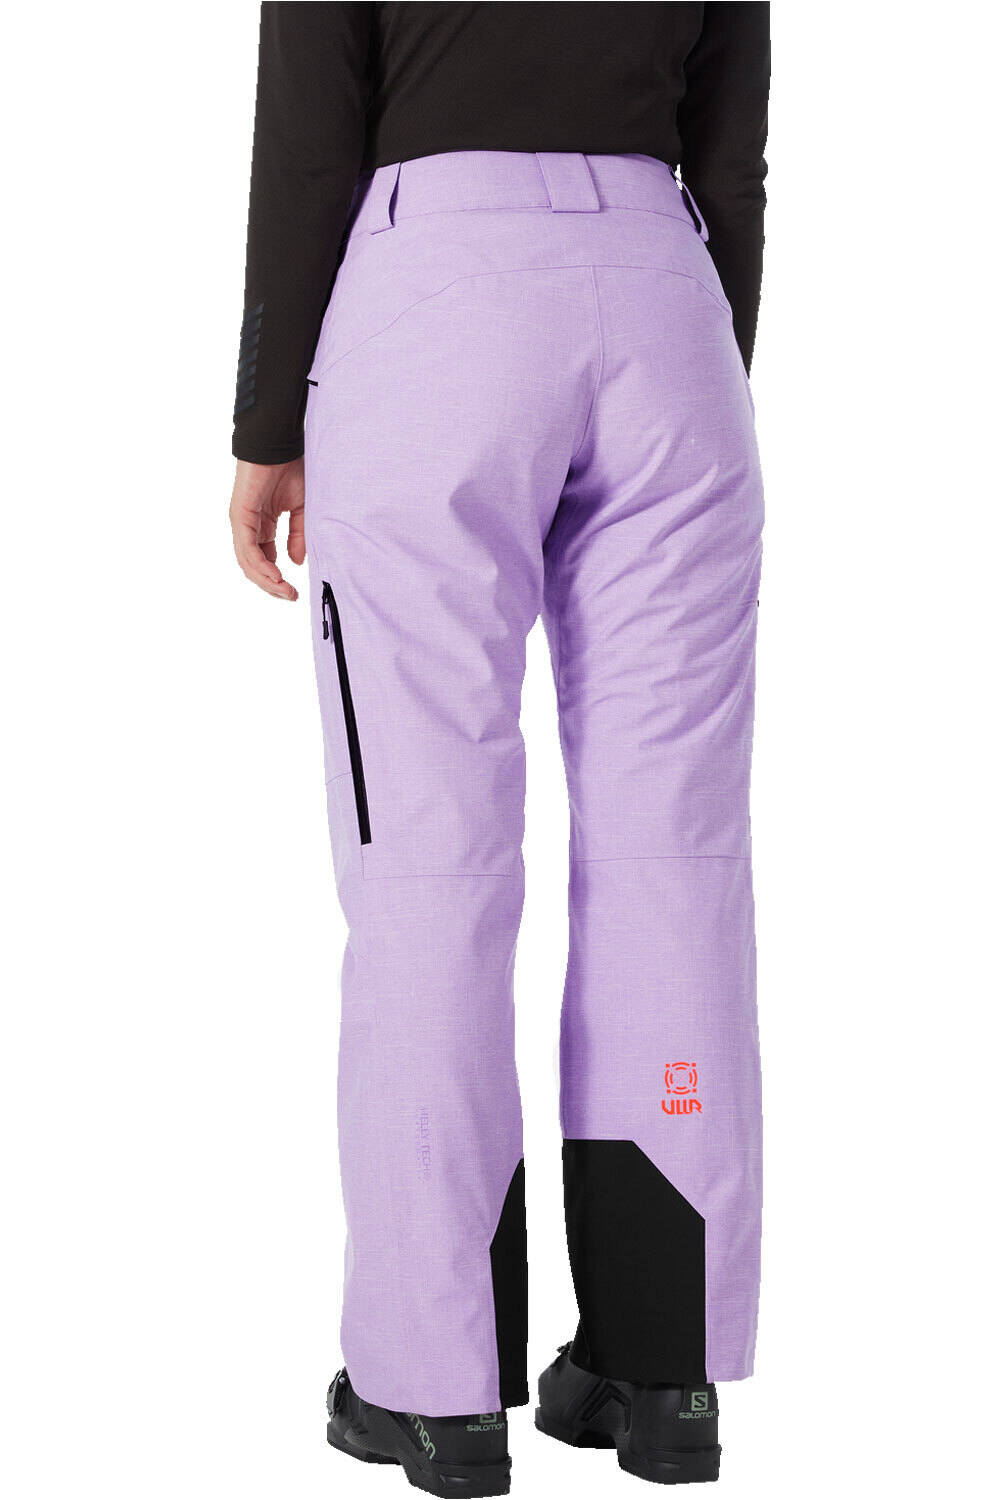 Helly Hansen pantalones esquí mujer W SWITCH CARGO INSULATED PANT vista trasera